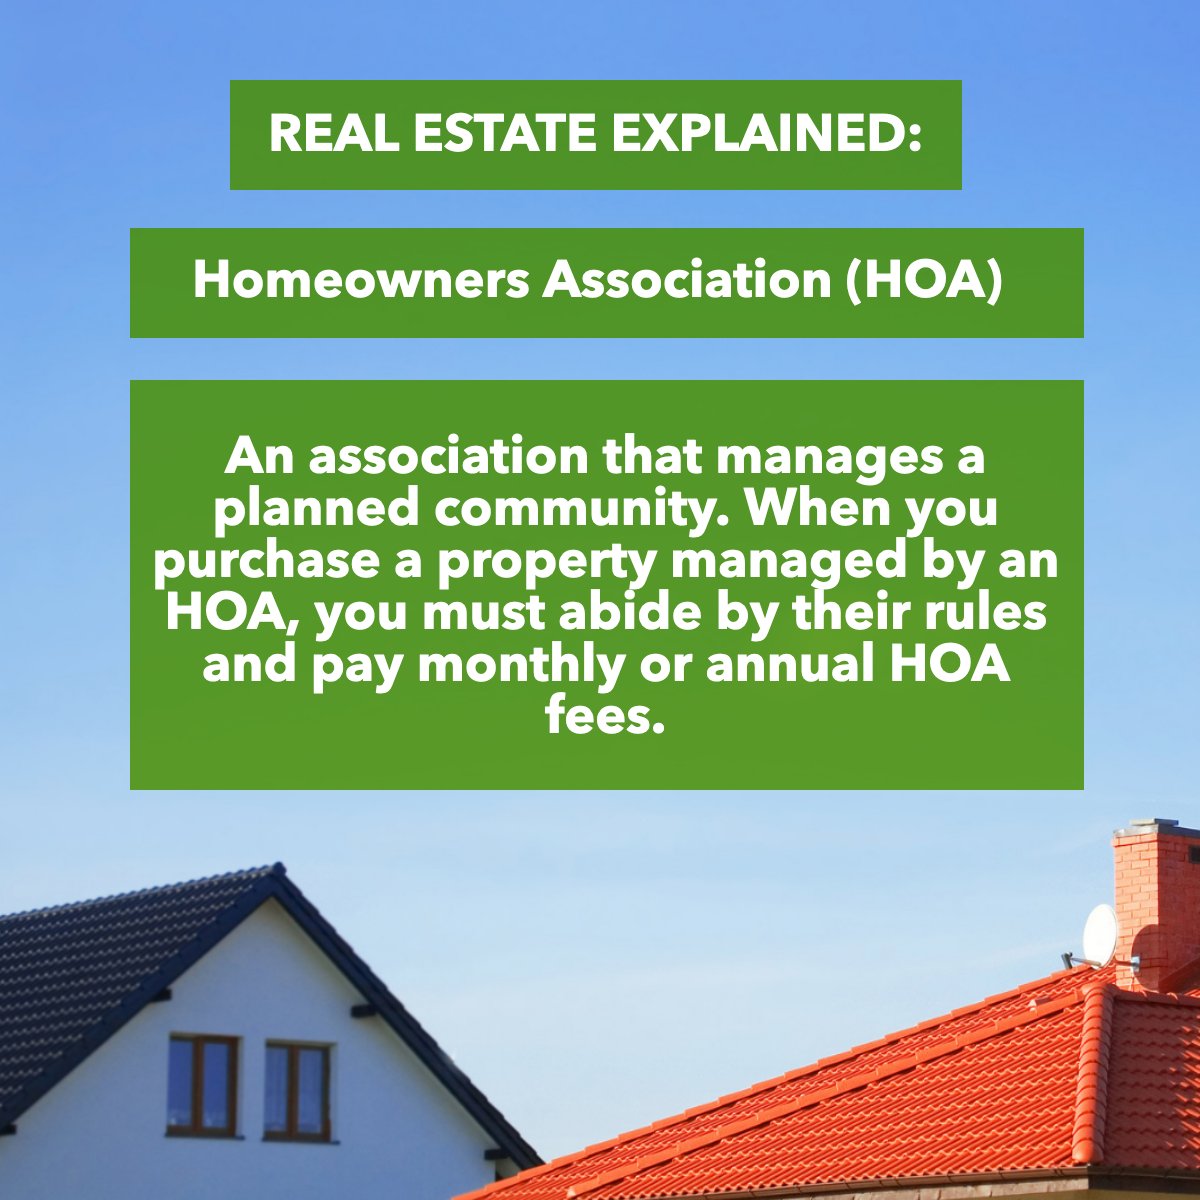 Real Estate Explained: 'Homeowners Association (HOA)' Have you been part of an HOA or are you currently part of an HOA? 🤔 #hoa #realestate #realestate101 #didyouknow #realestatefacts #RacingRealEstateAgent #BarrettRealEstate #StoneTreeRealEstateTeam